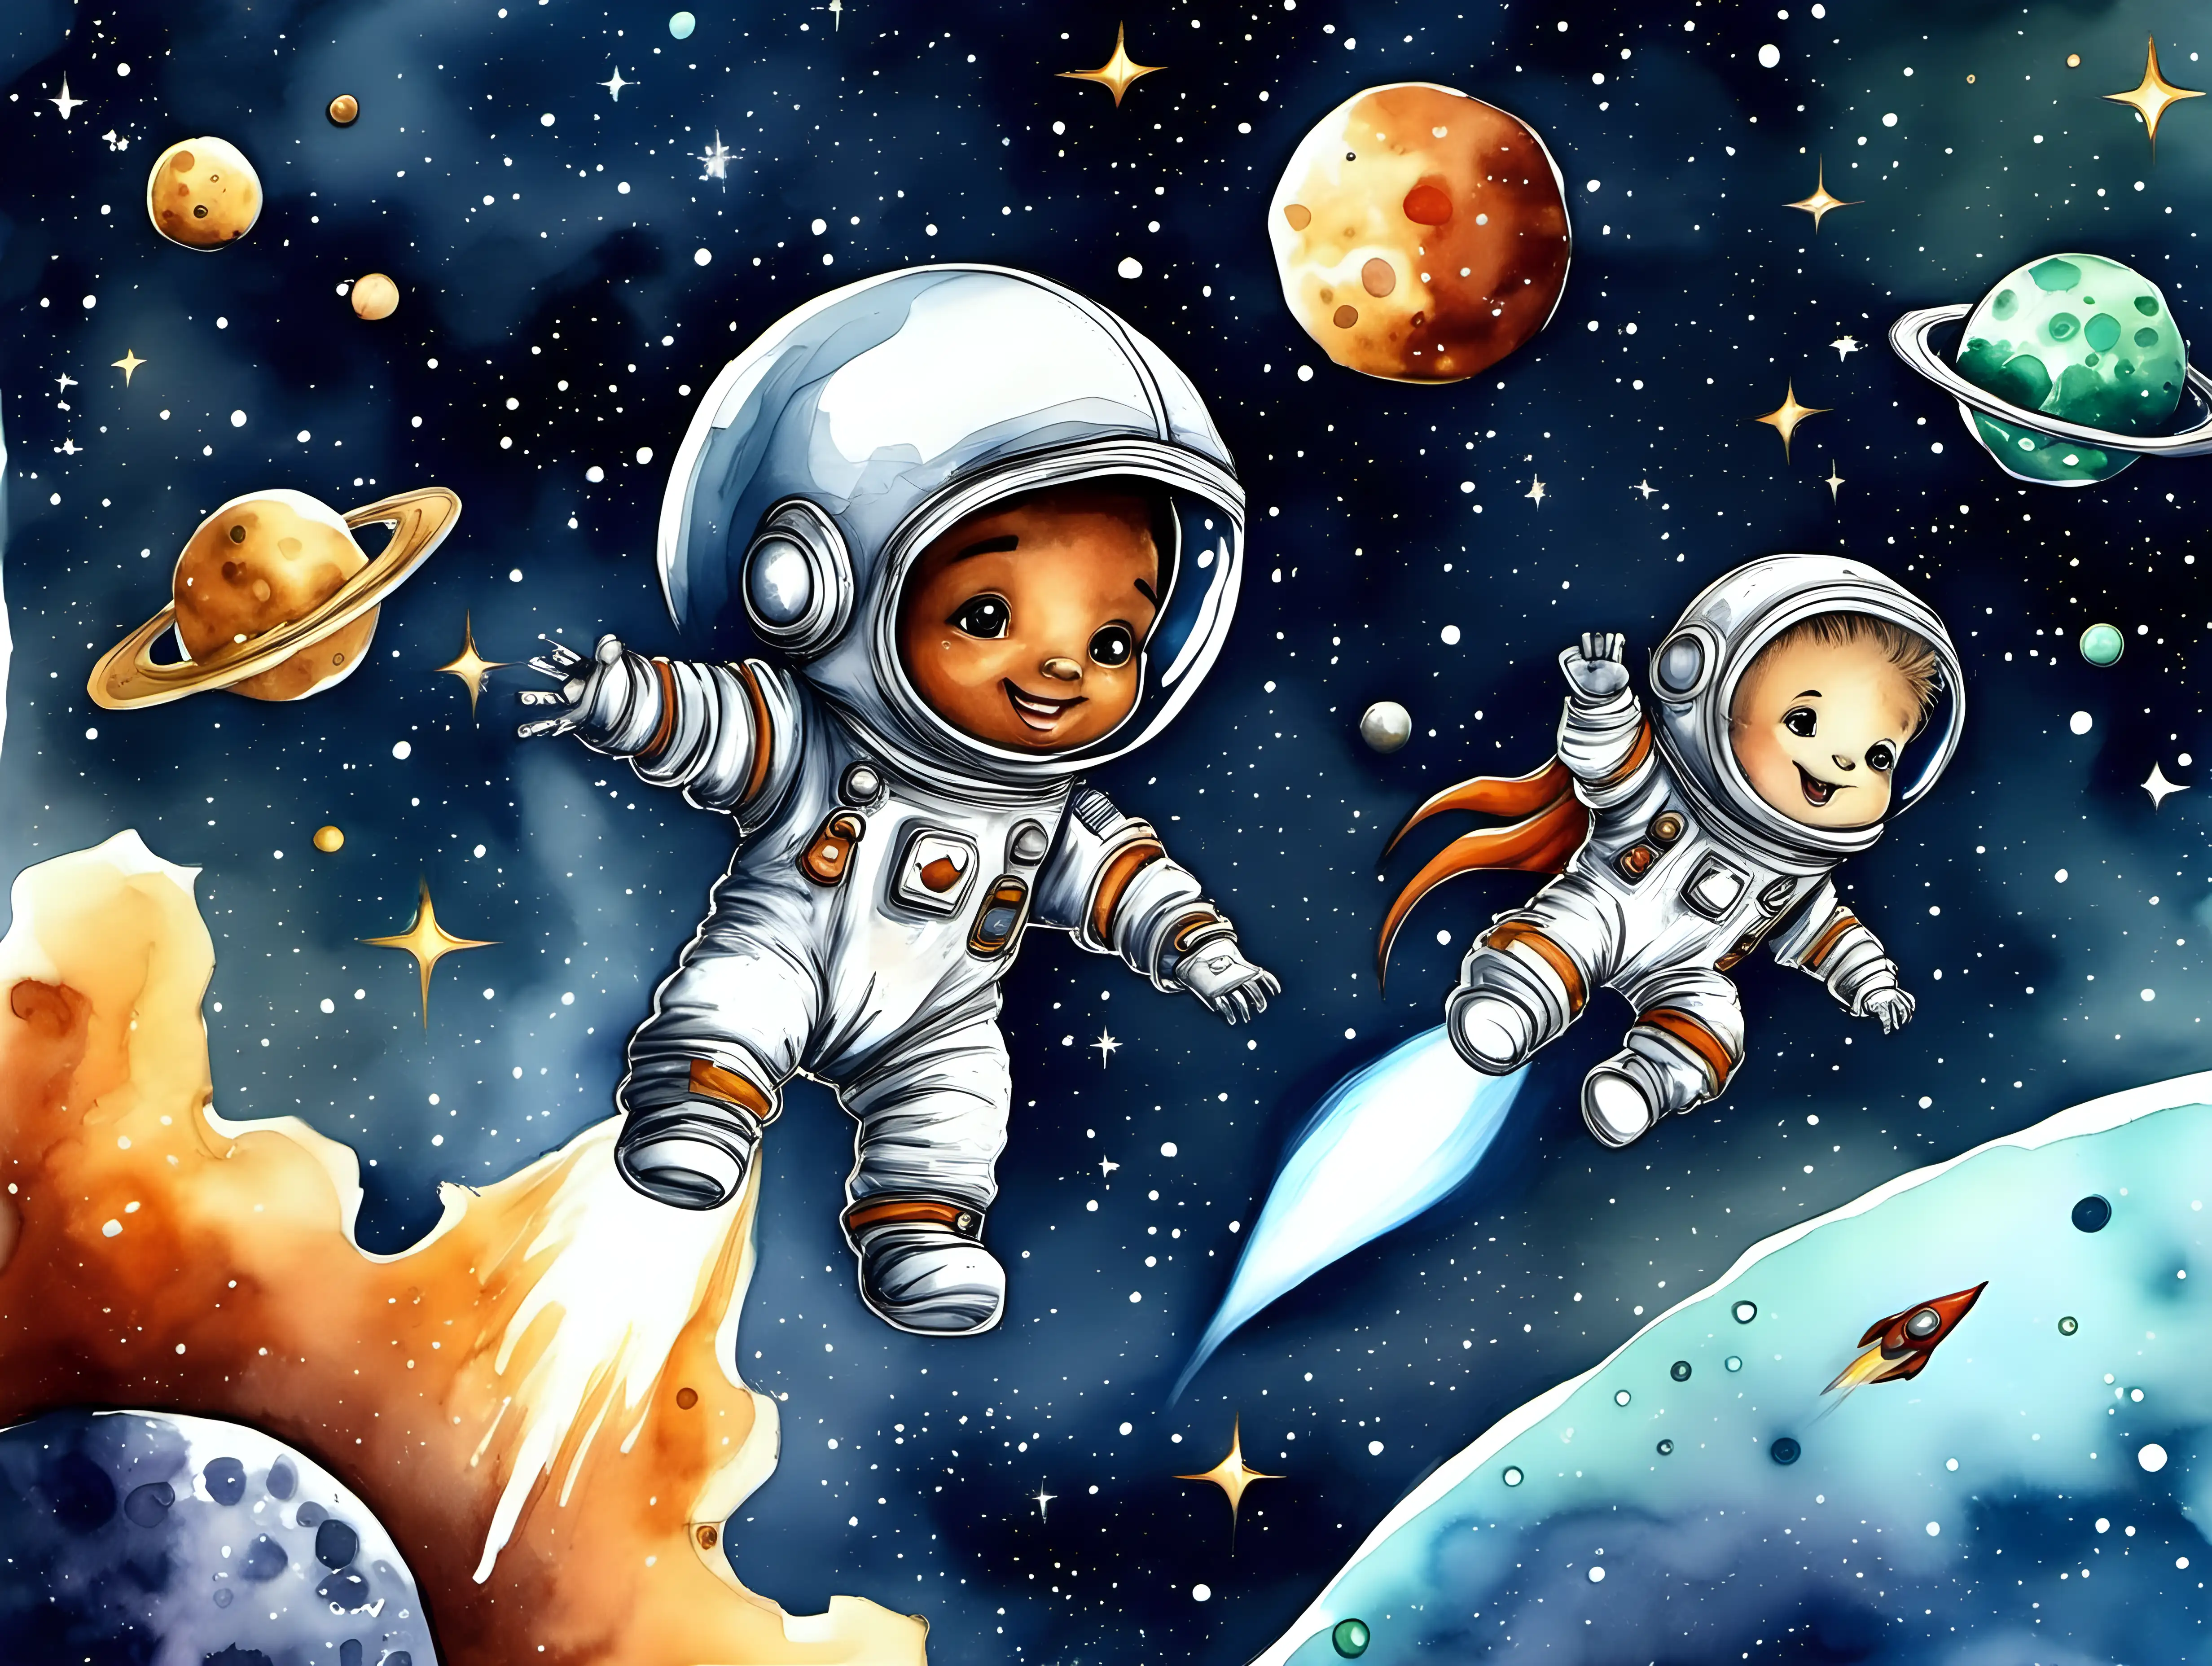 —sameseed  https://www.midjourneyai.ai/record/49765-Adorable-Space-Exploration-Cute-Astronaut-in-Rocket-Soaring-through-Watercolor-Galaxy, Two aliens, one astronaut boy